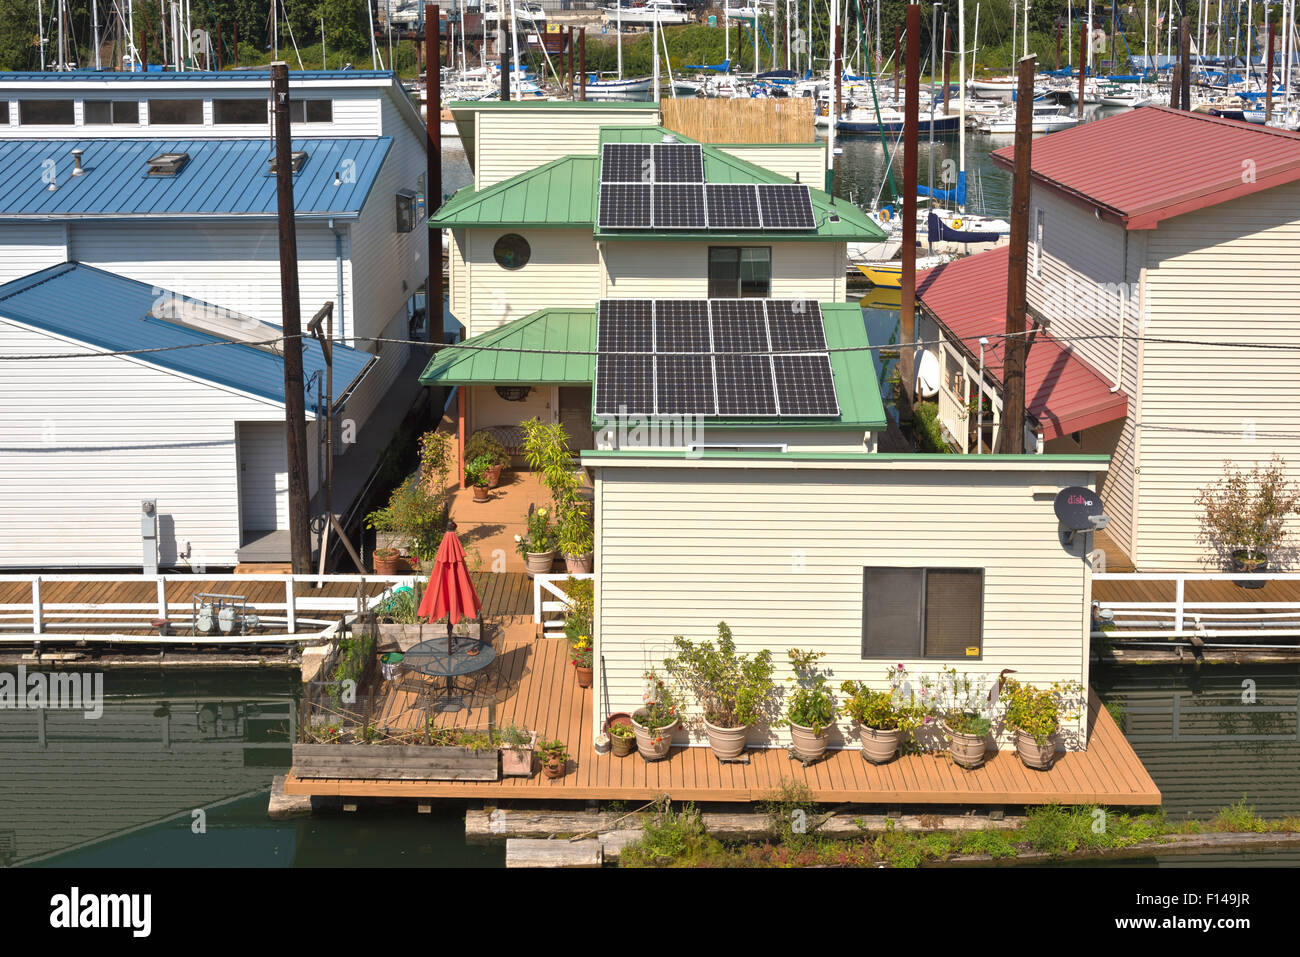 Solar panels on rooftops on a floating house Portland Oregon. Stock Photo